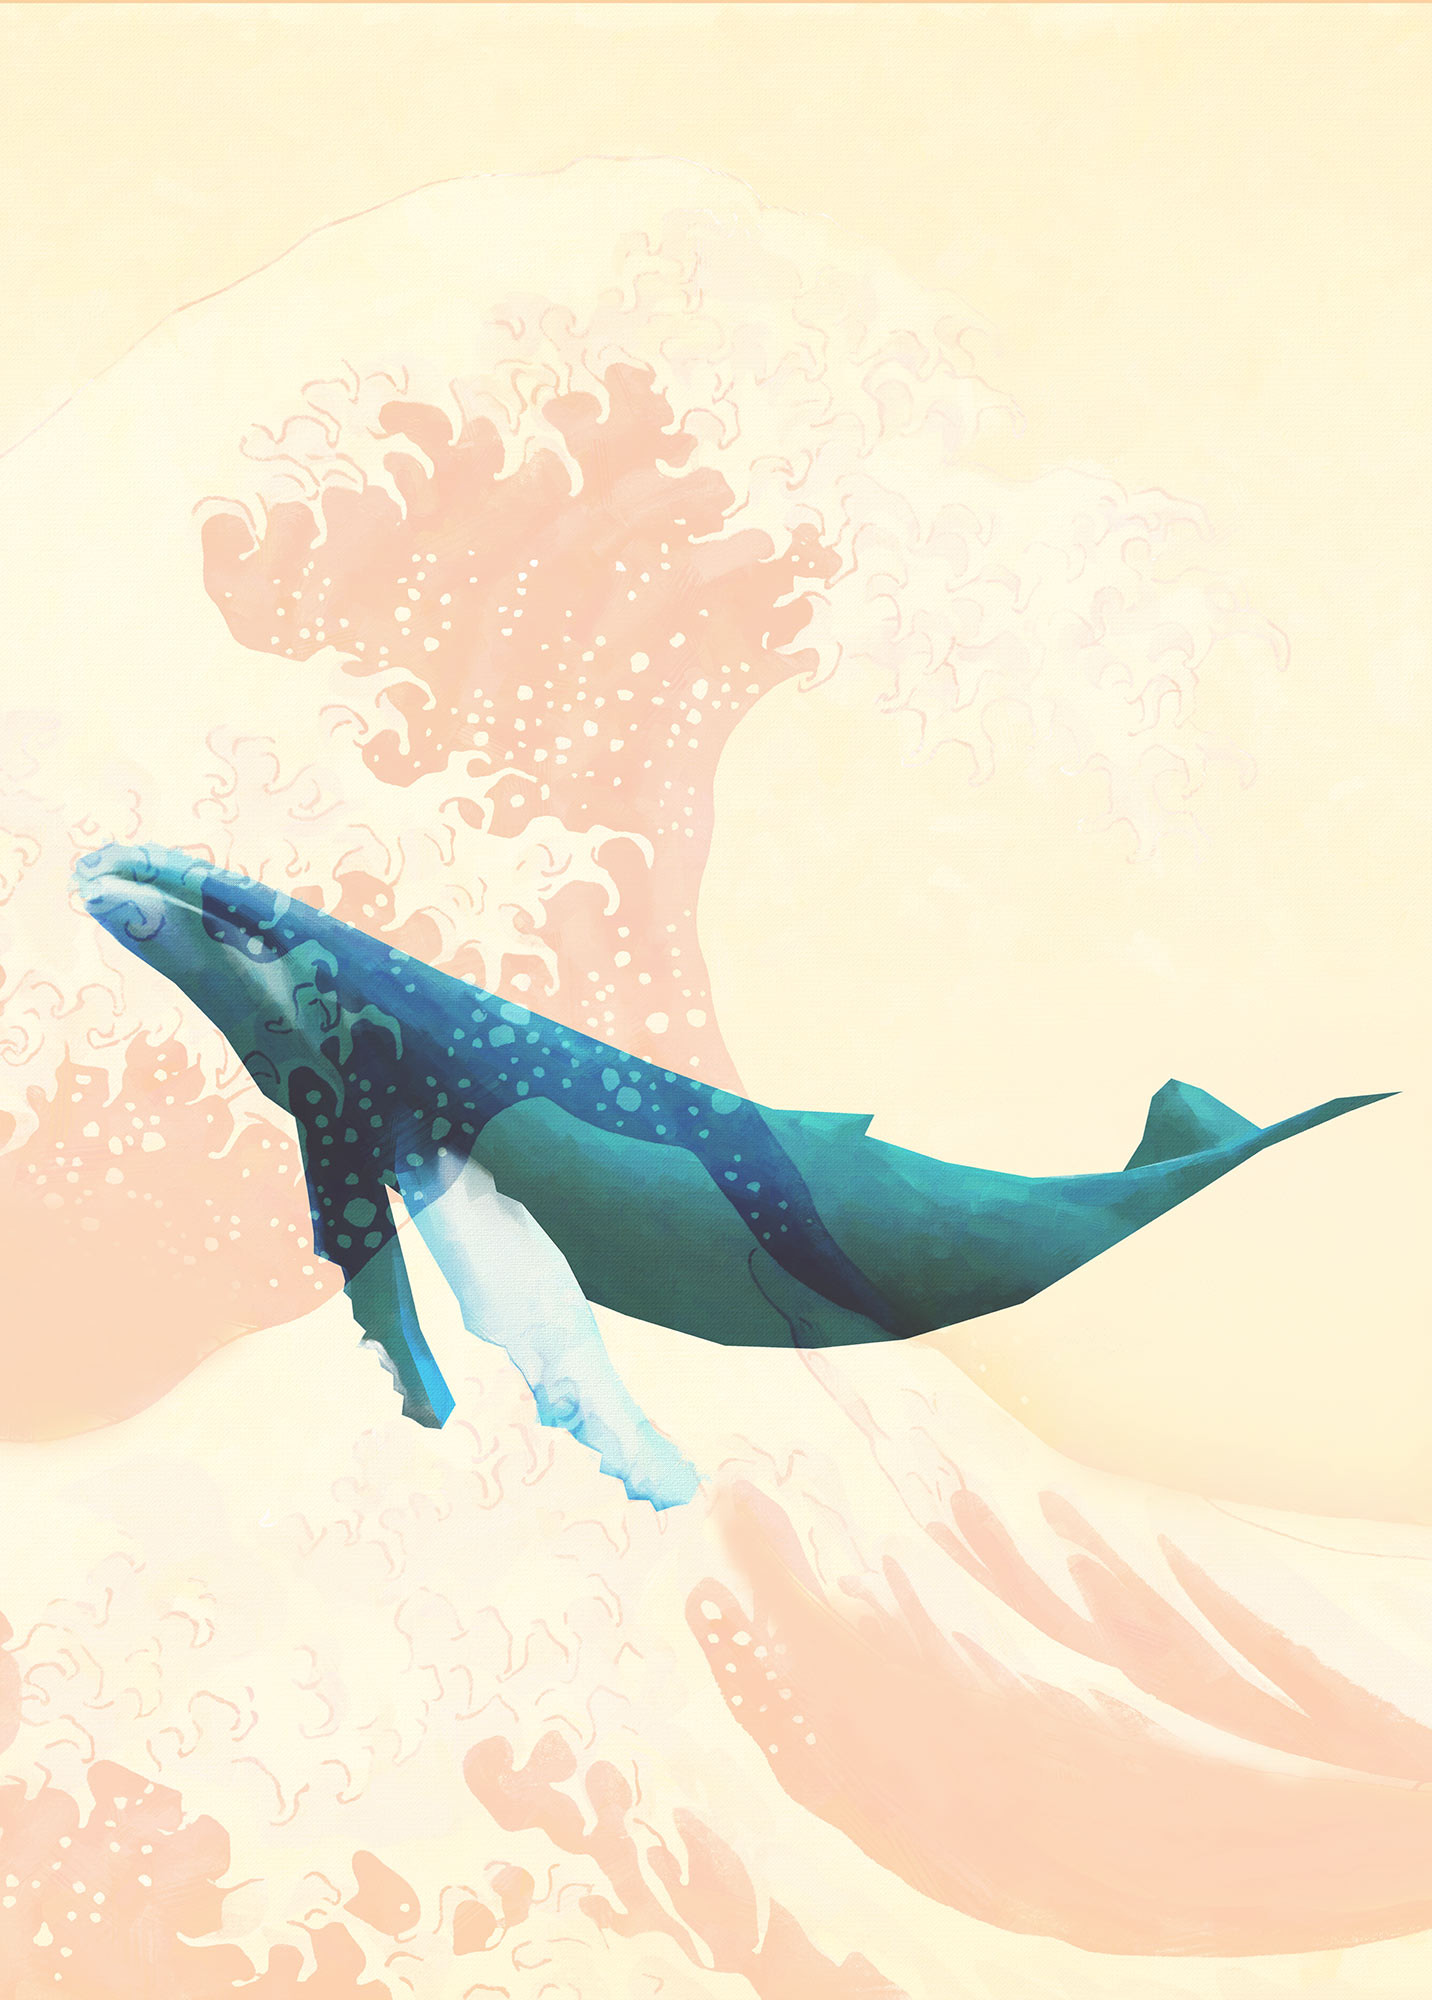 Whale iPhone Wallpaper HD